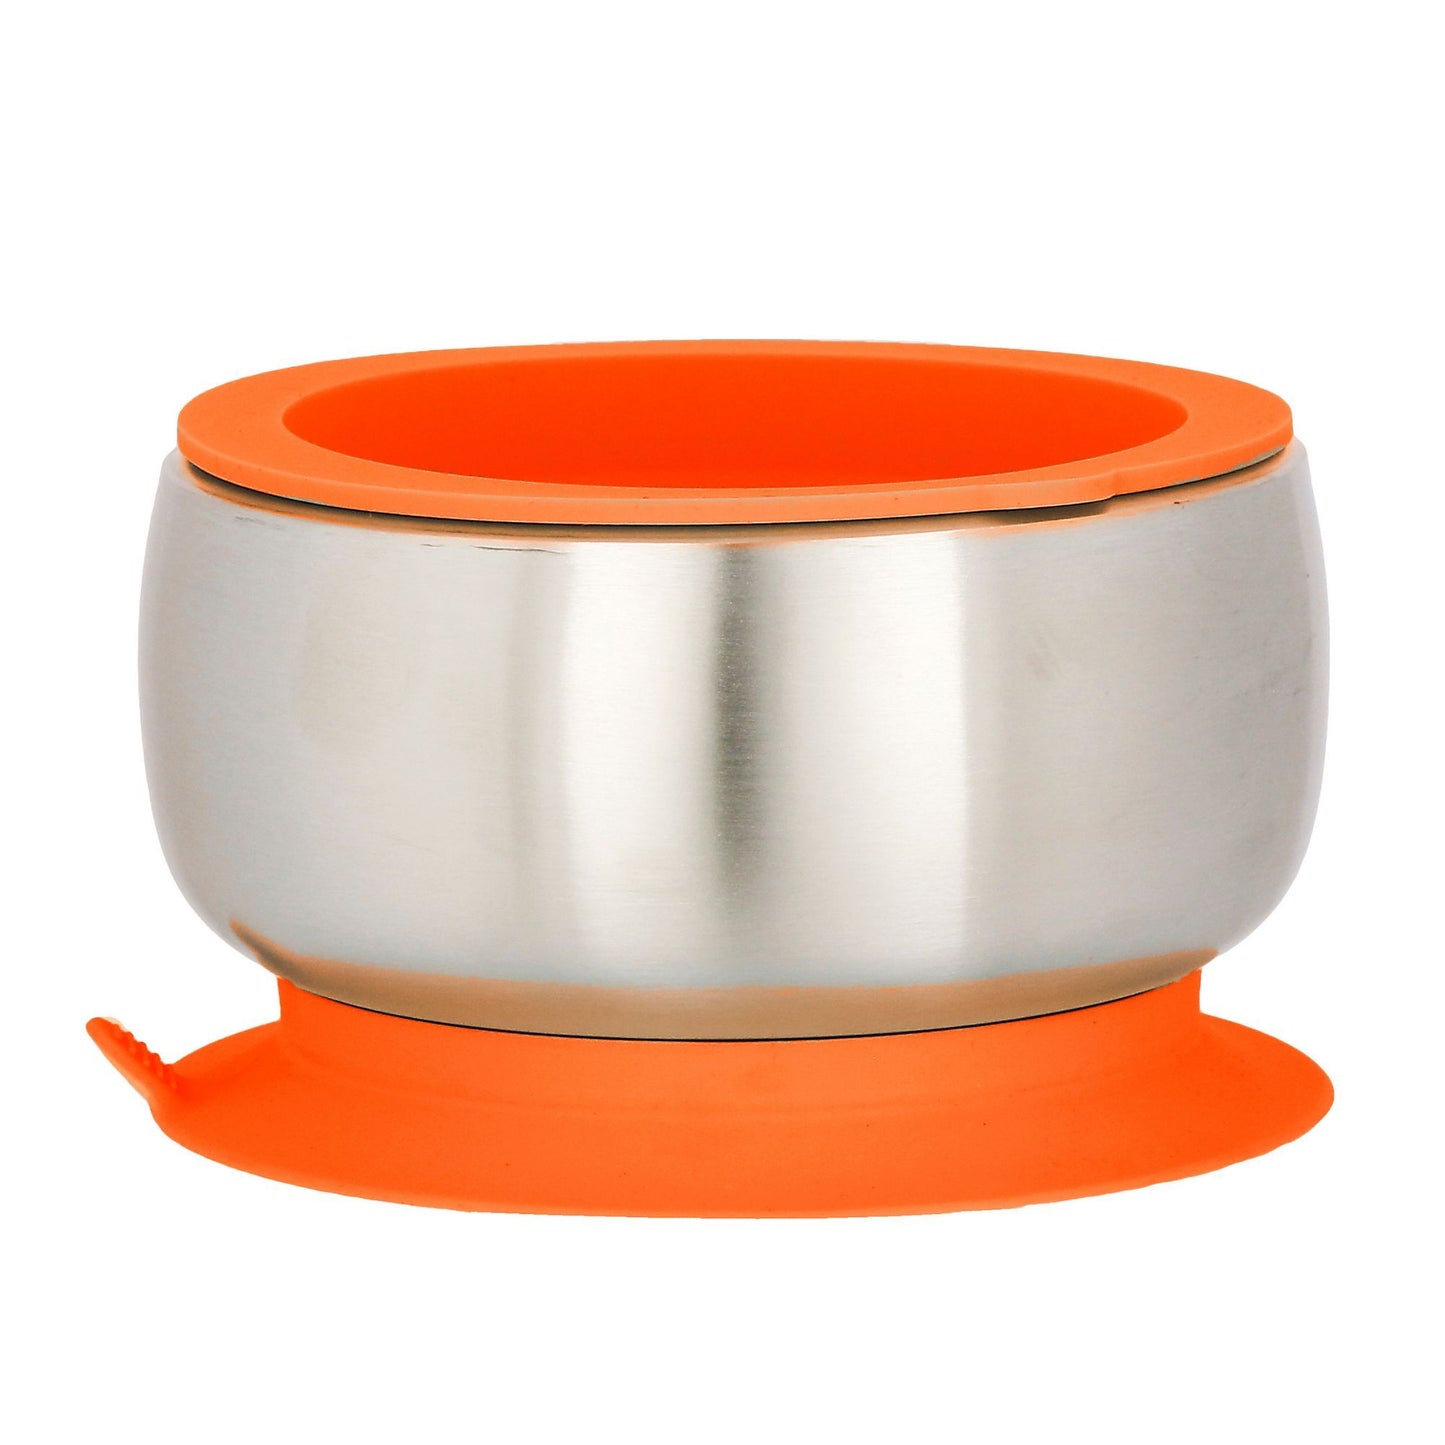 Stainless Steel Suction Baby Bowl + Air Tight Lid